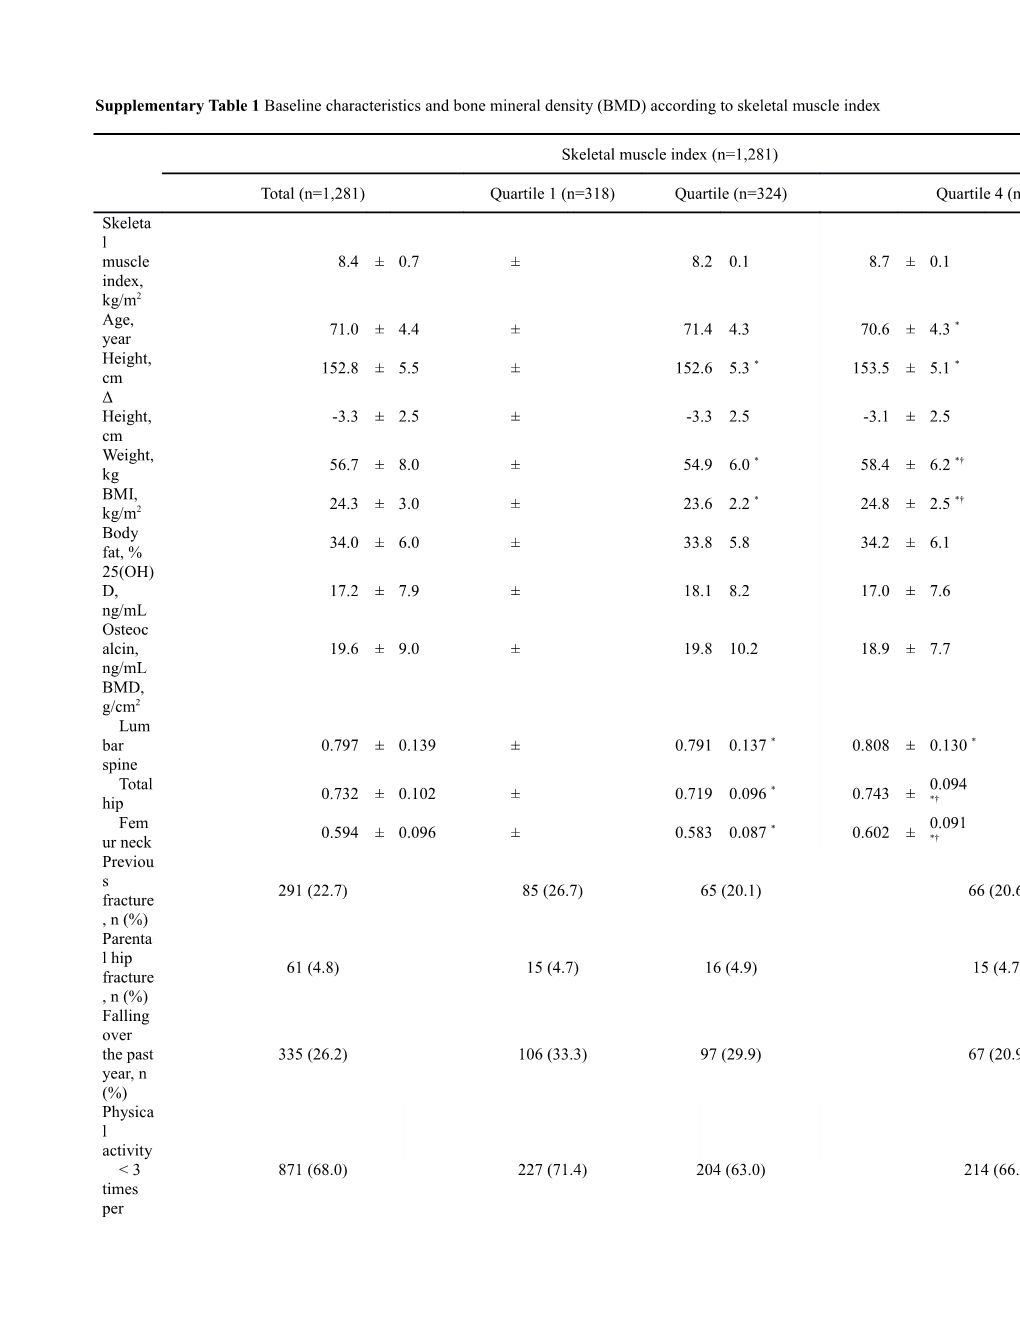 Supplementary Table 1 Baseline Characteristics and Bone Mineral Density (BMD) According